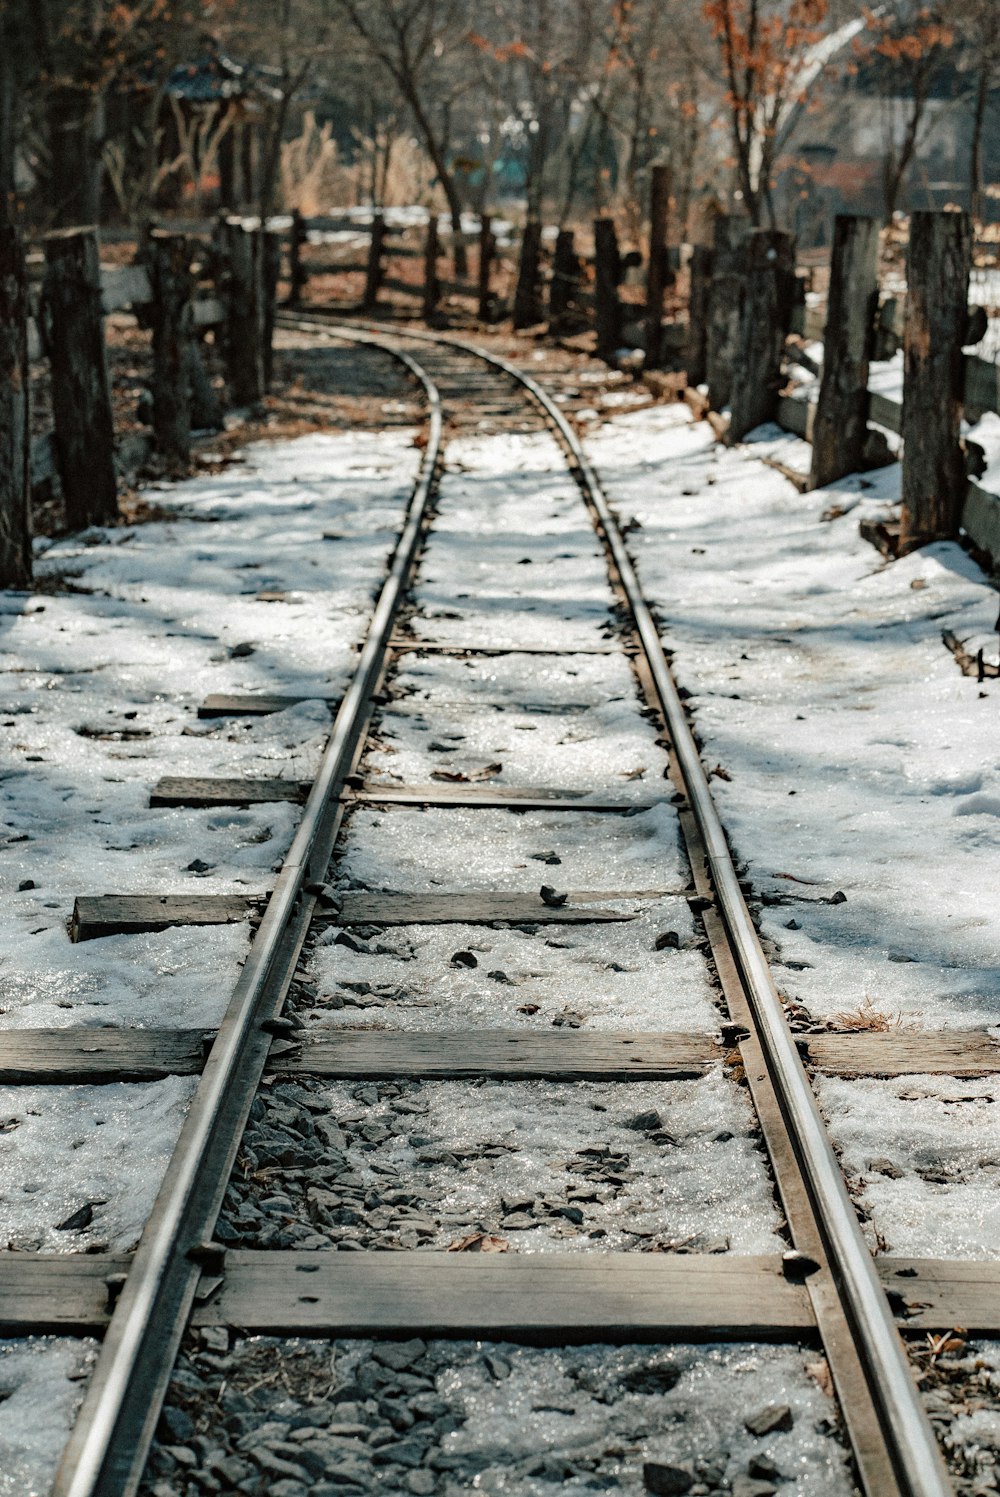 a train track in the middle of a snowy area